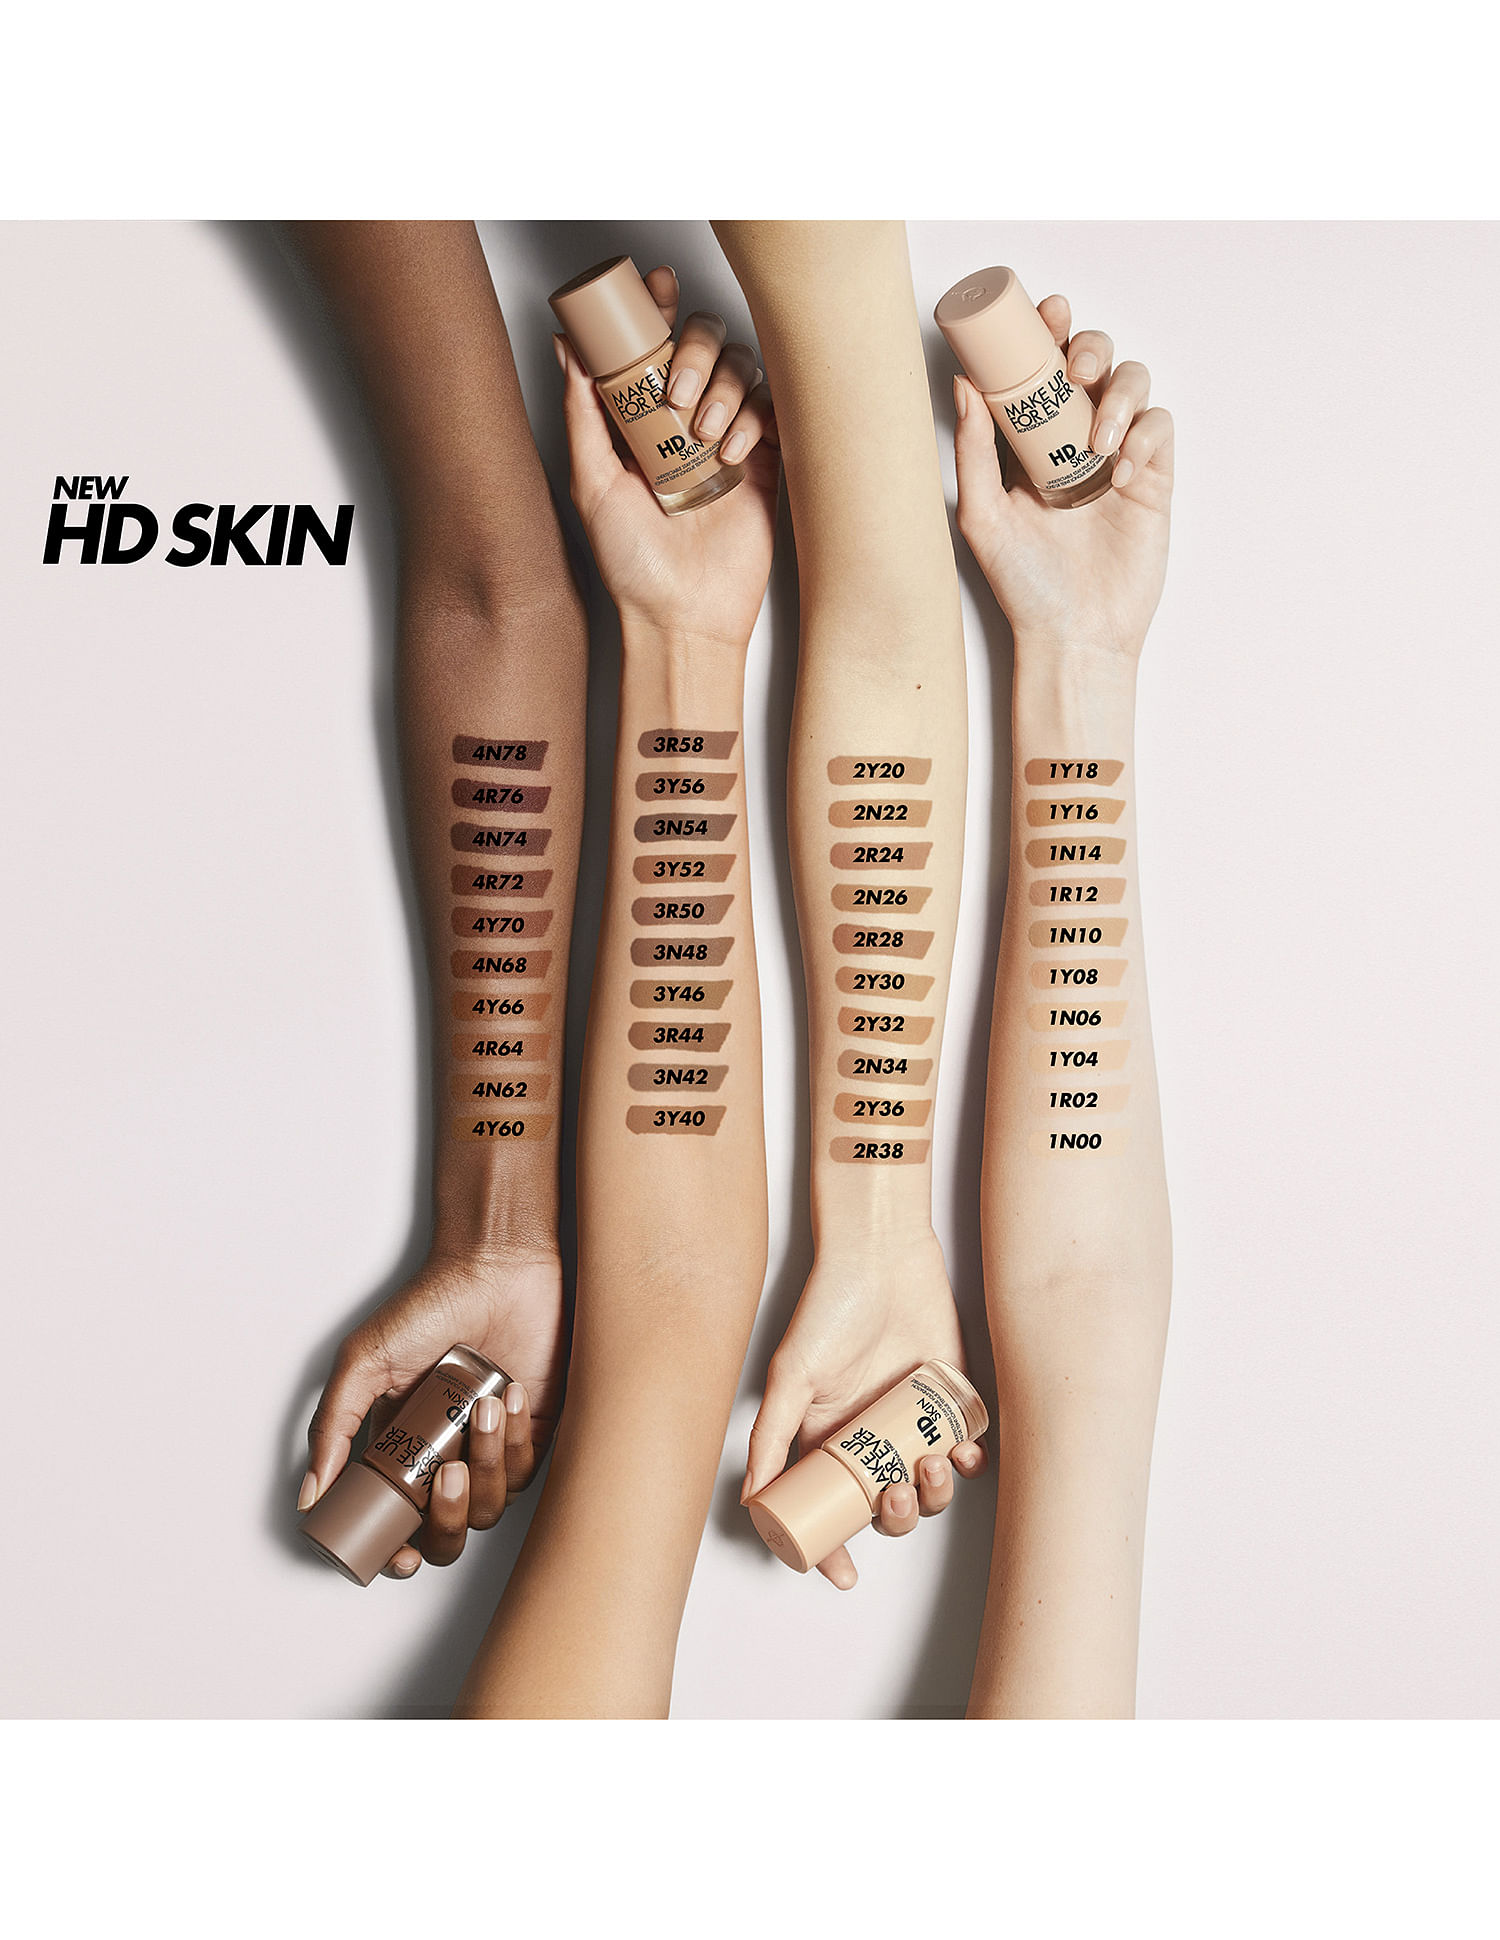 Make Up for Ever HD Skin Undetectable Longwear Foundation